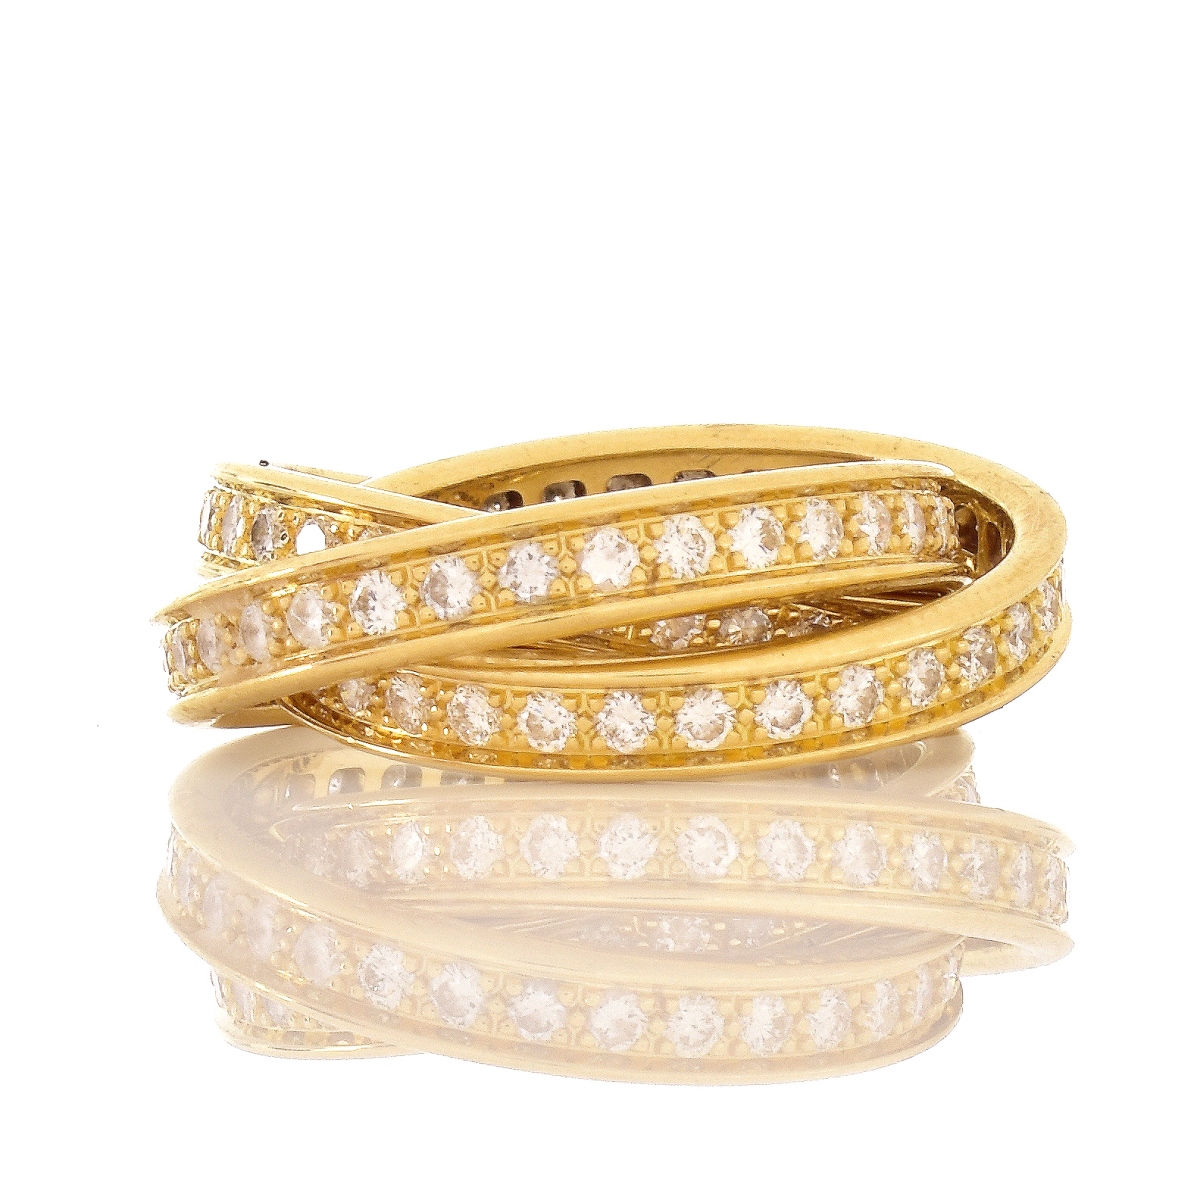 Cartier Diamond and 18K Gold Rolling Ring